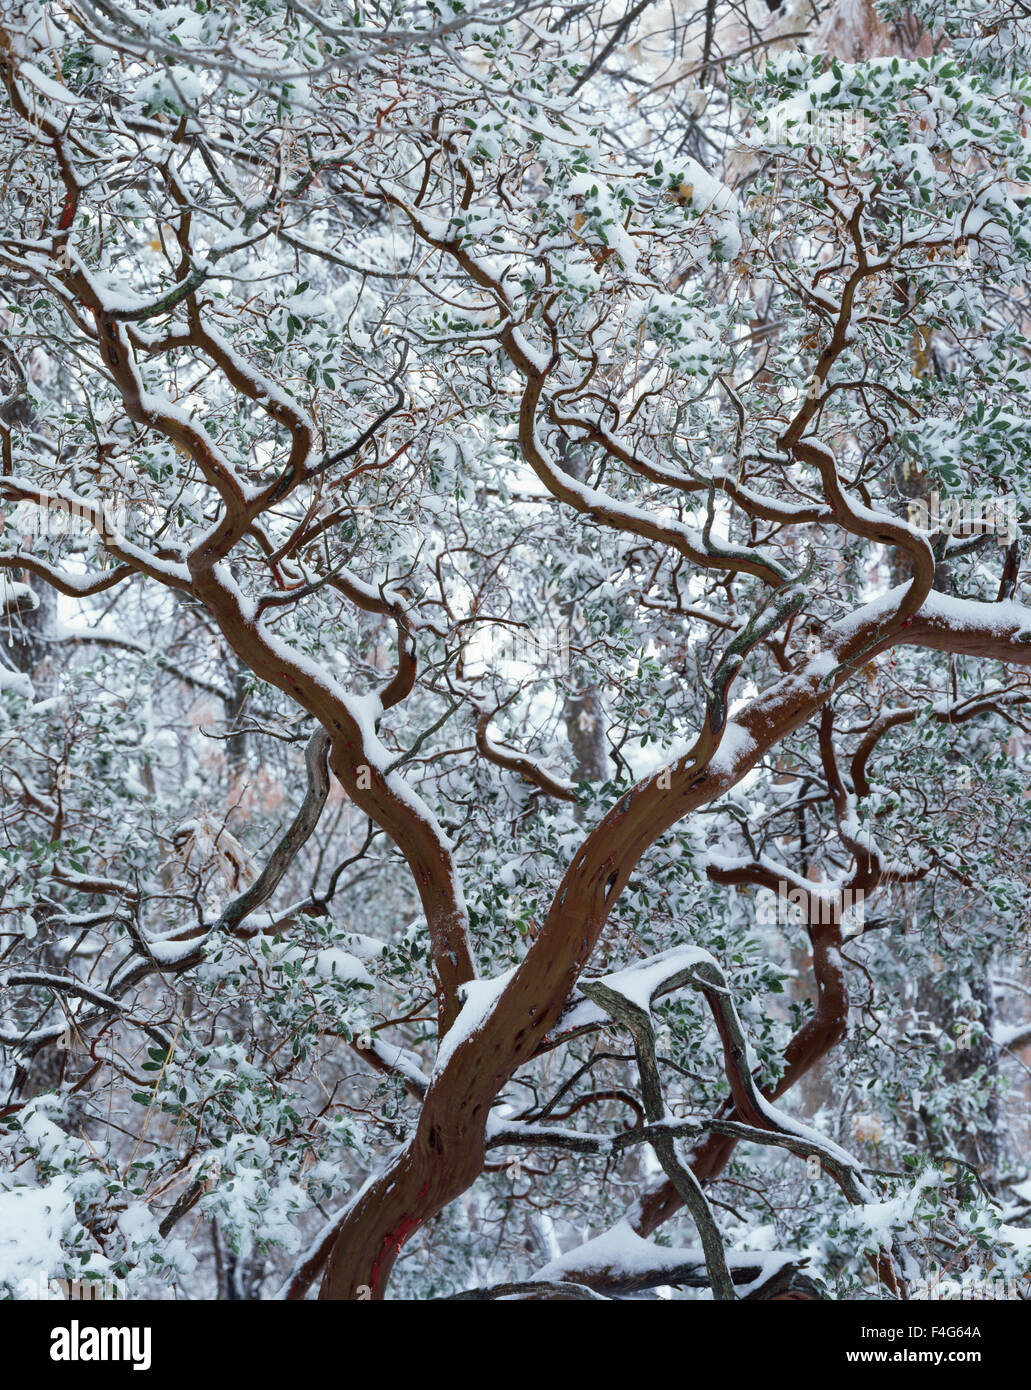 California, Cleveland National Forest, Laguna Mountains, snow-covered Manzanita (Arctostaphylos). (Large format sizes available) Stock Photo